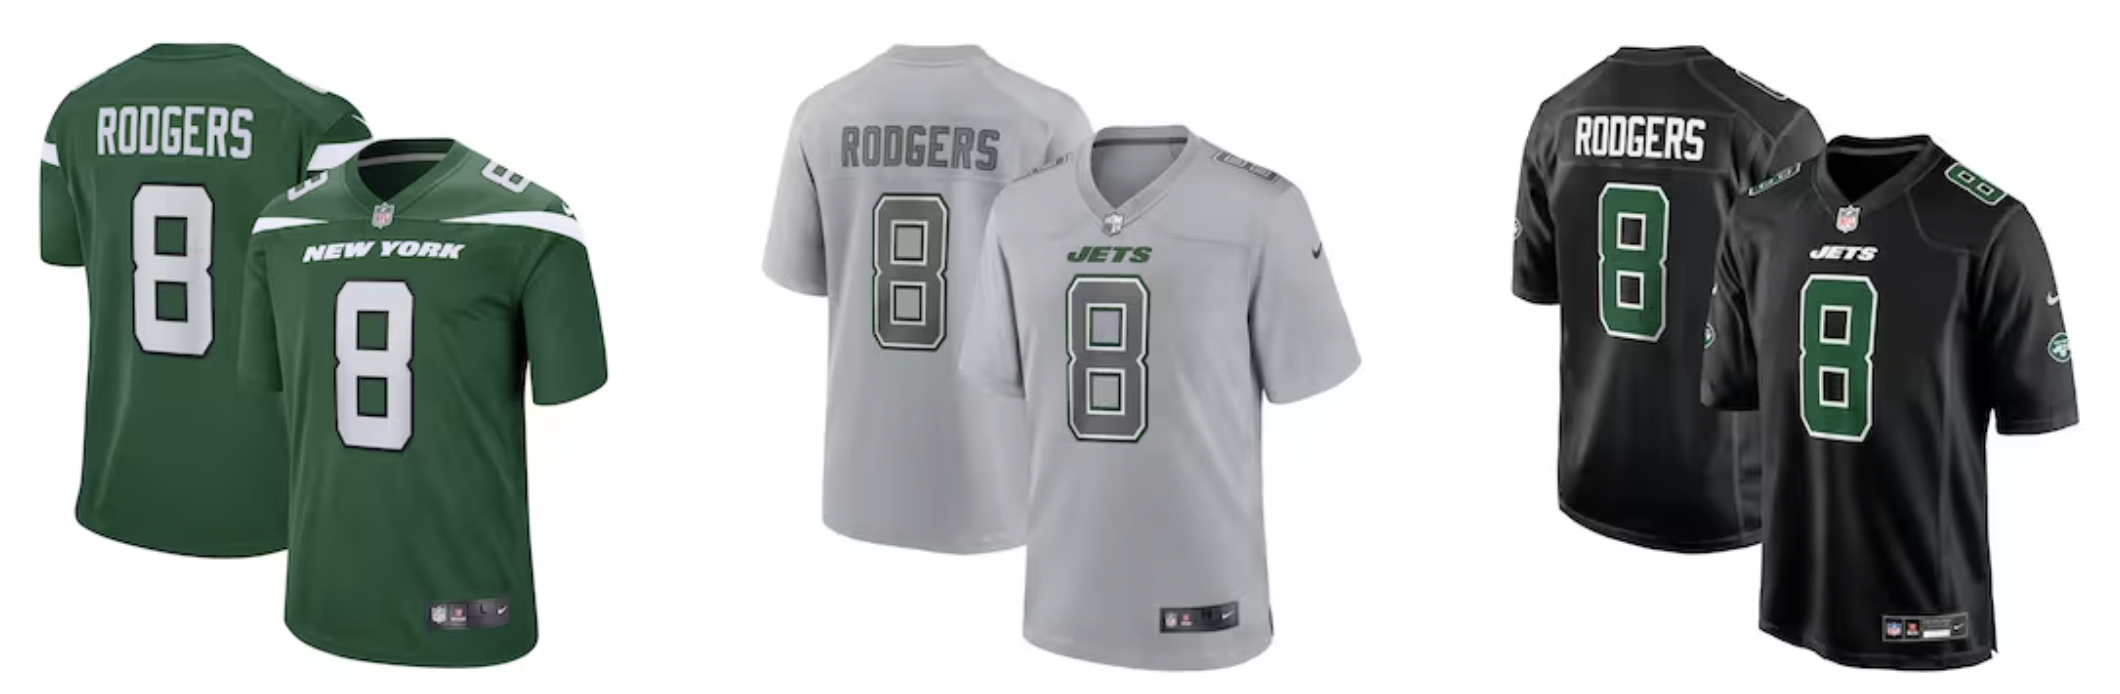 How to get Aaron Rodgers Jets jerseys now on Fanatics